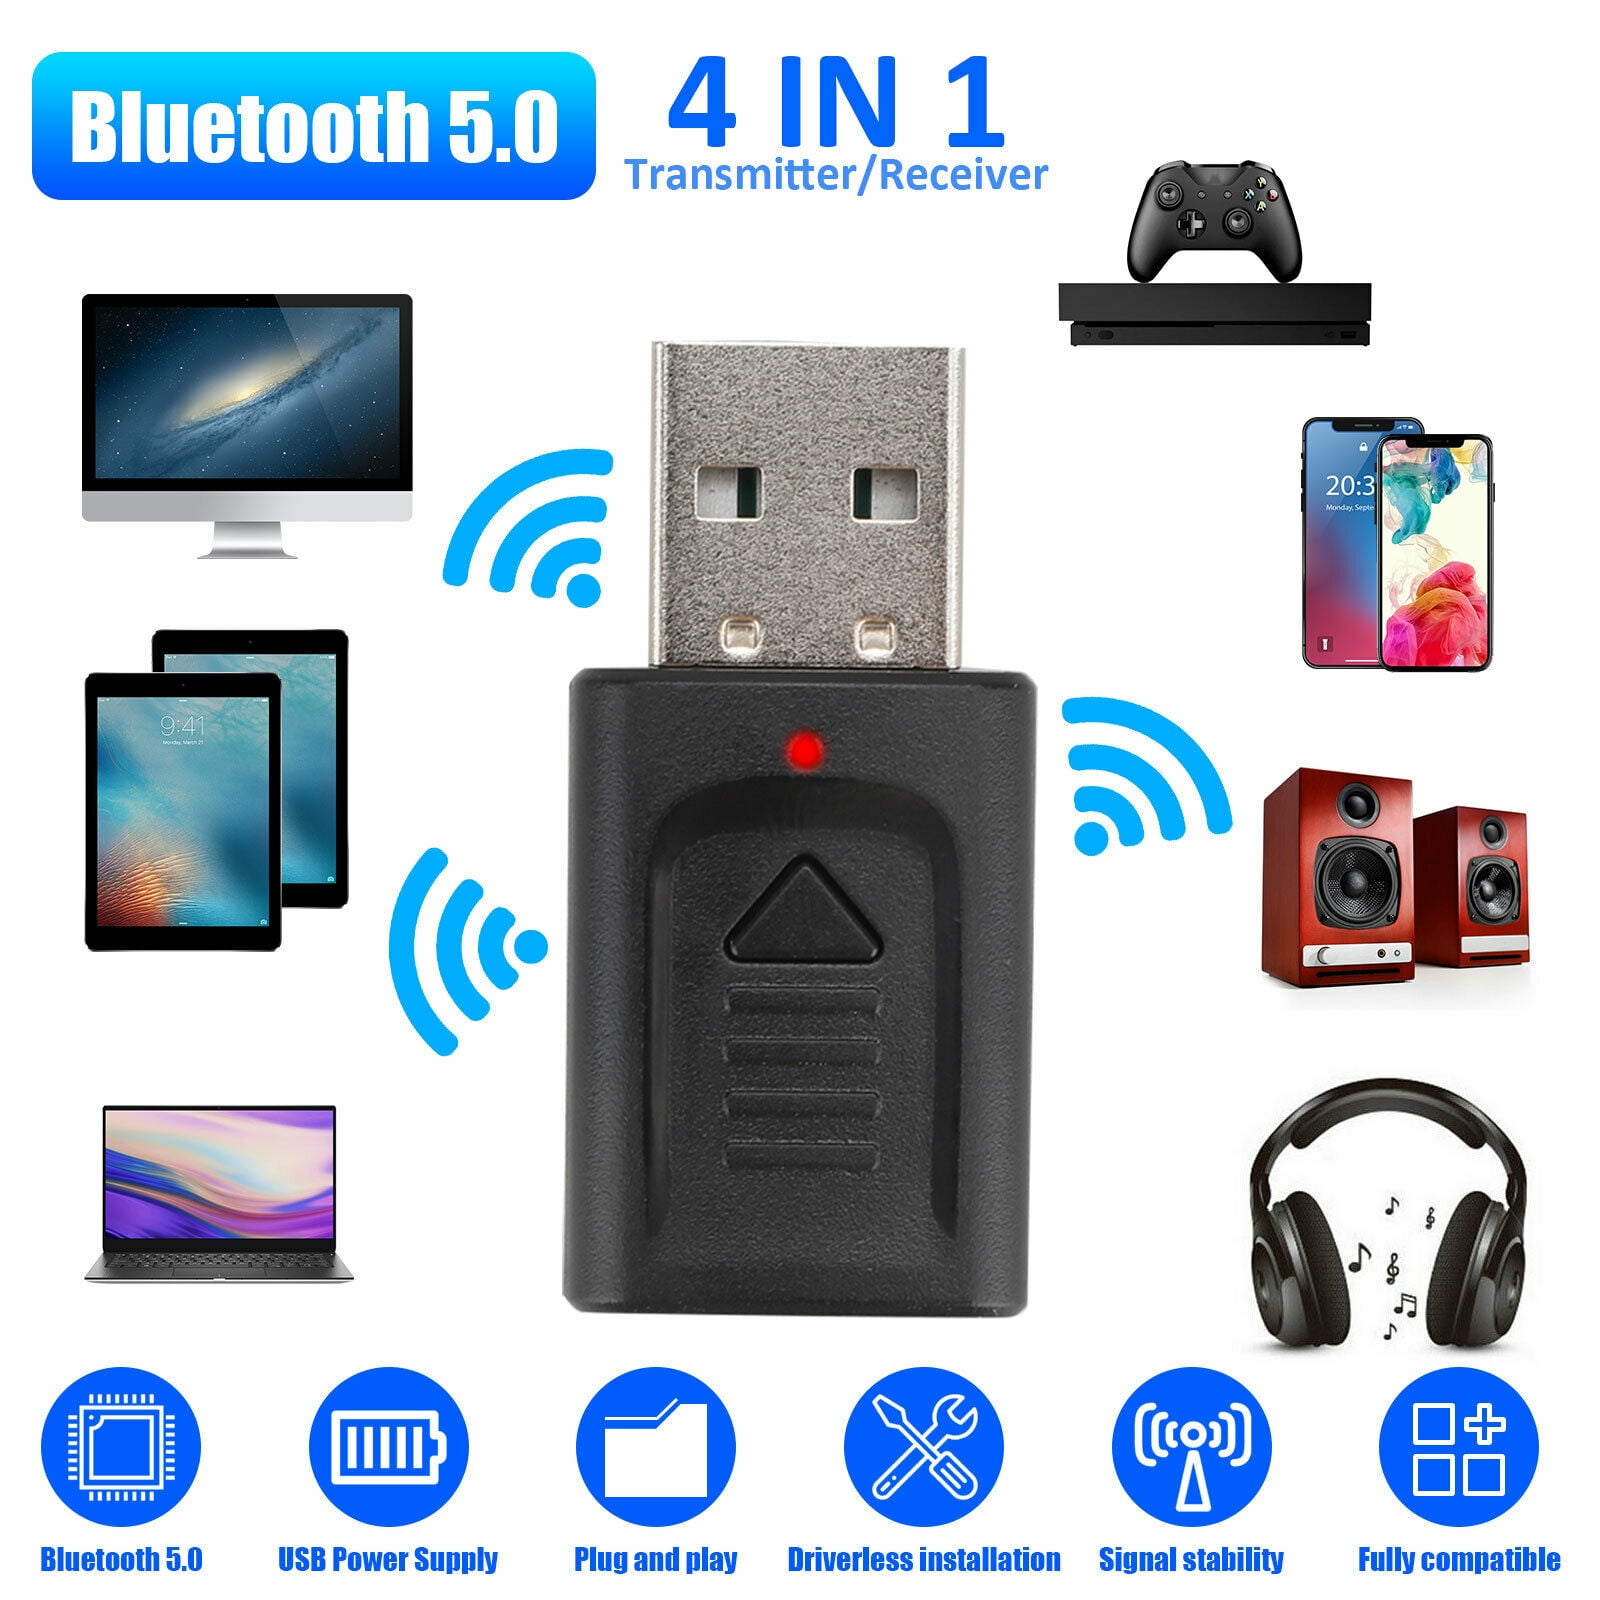 1*Wireless Bluetooth Dongle USB Car Adapter Reciever For PC iPod PDA Computer 